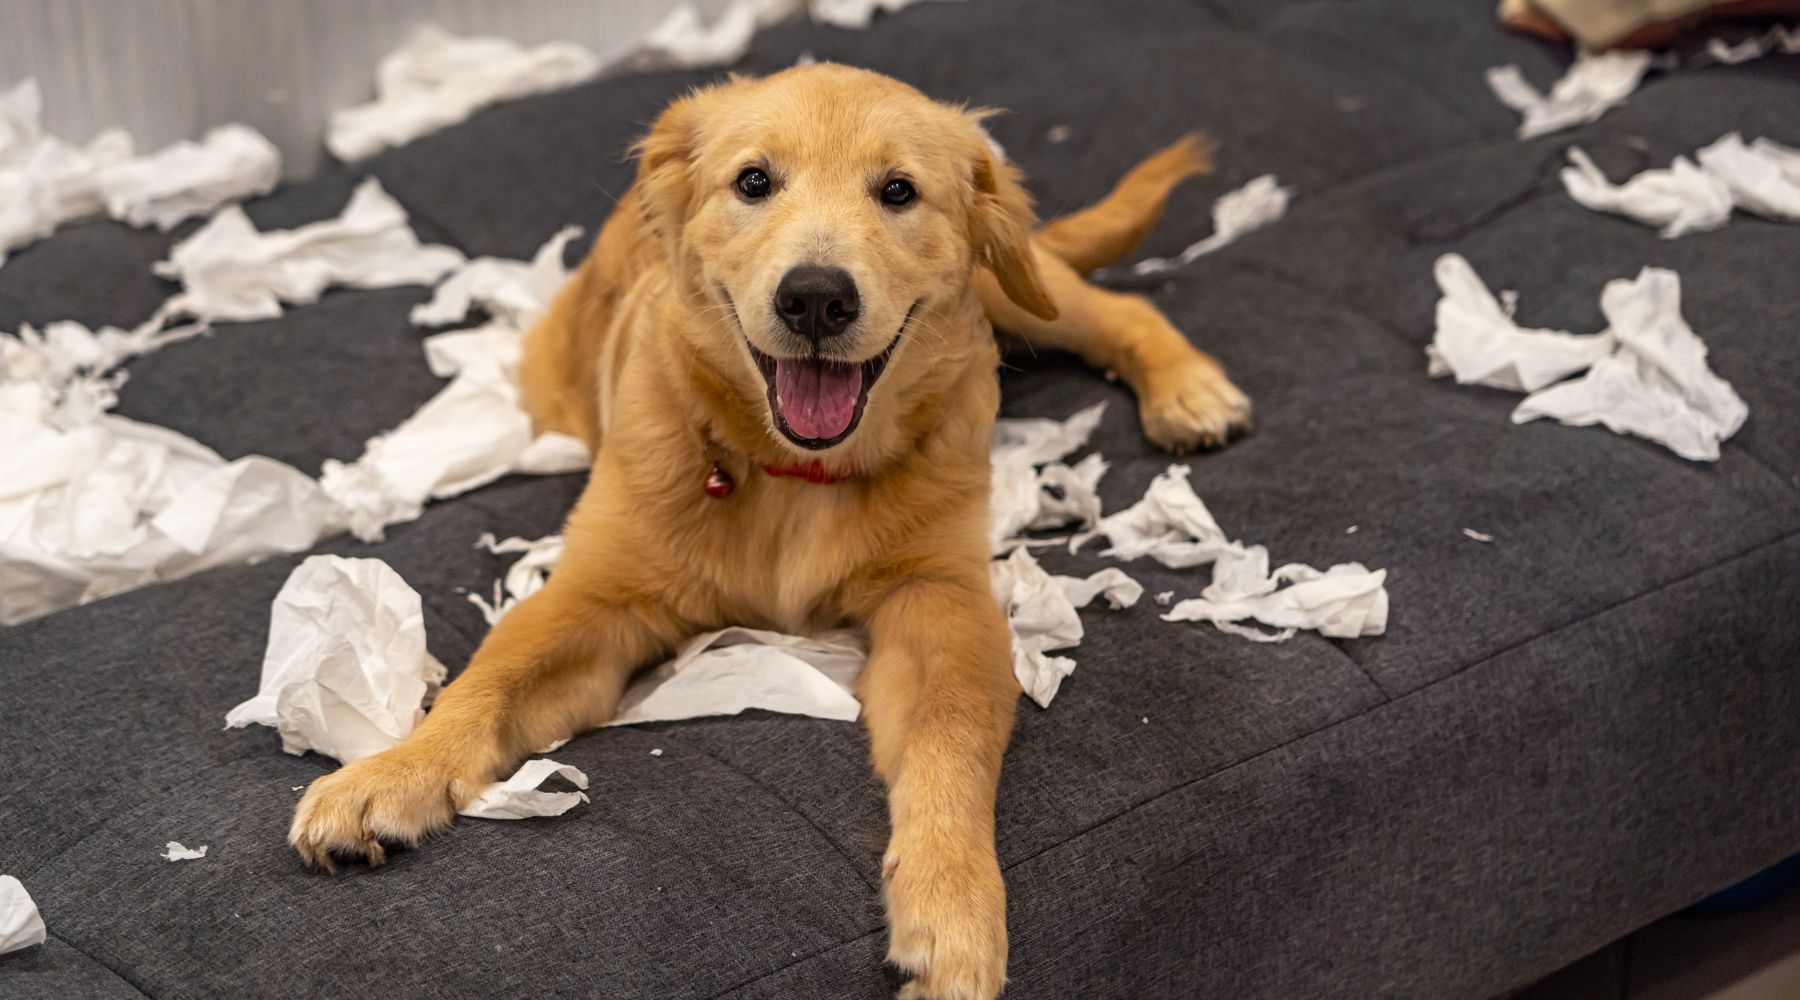 Dog with ripped up toilet paper